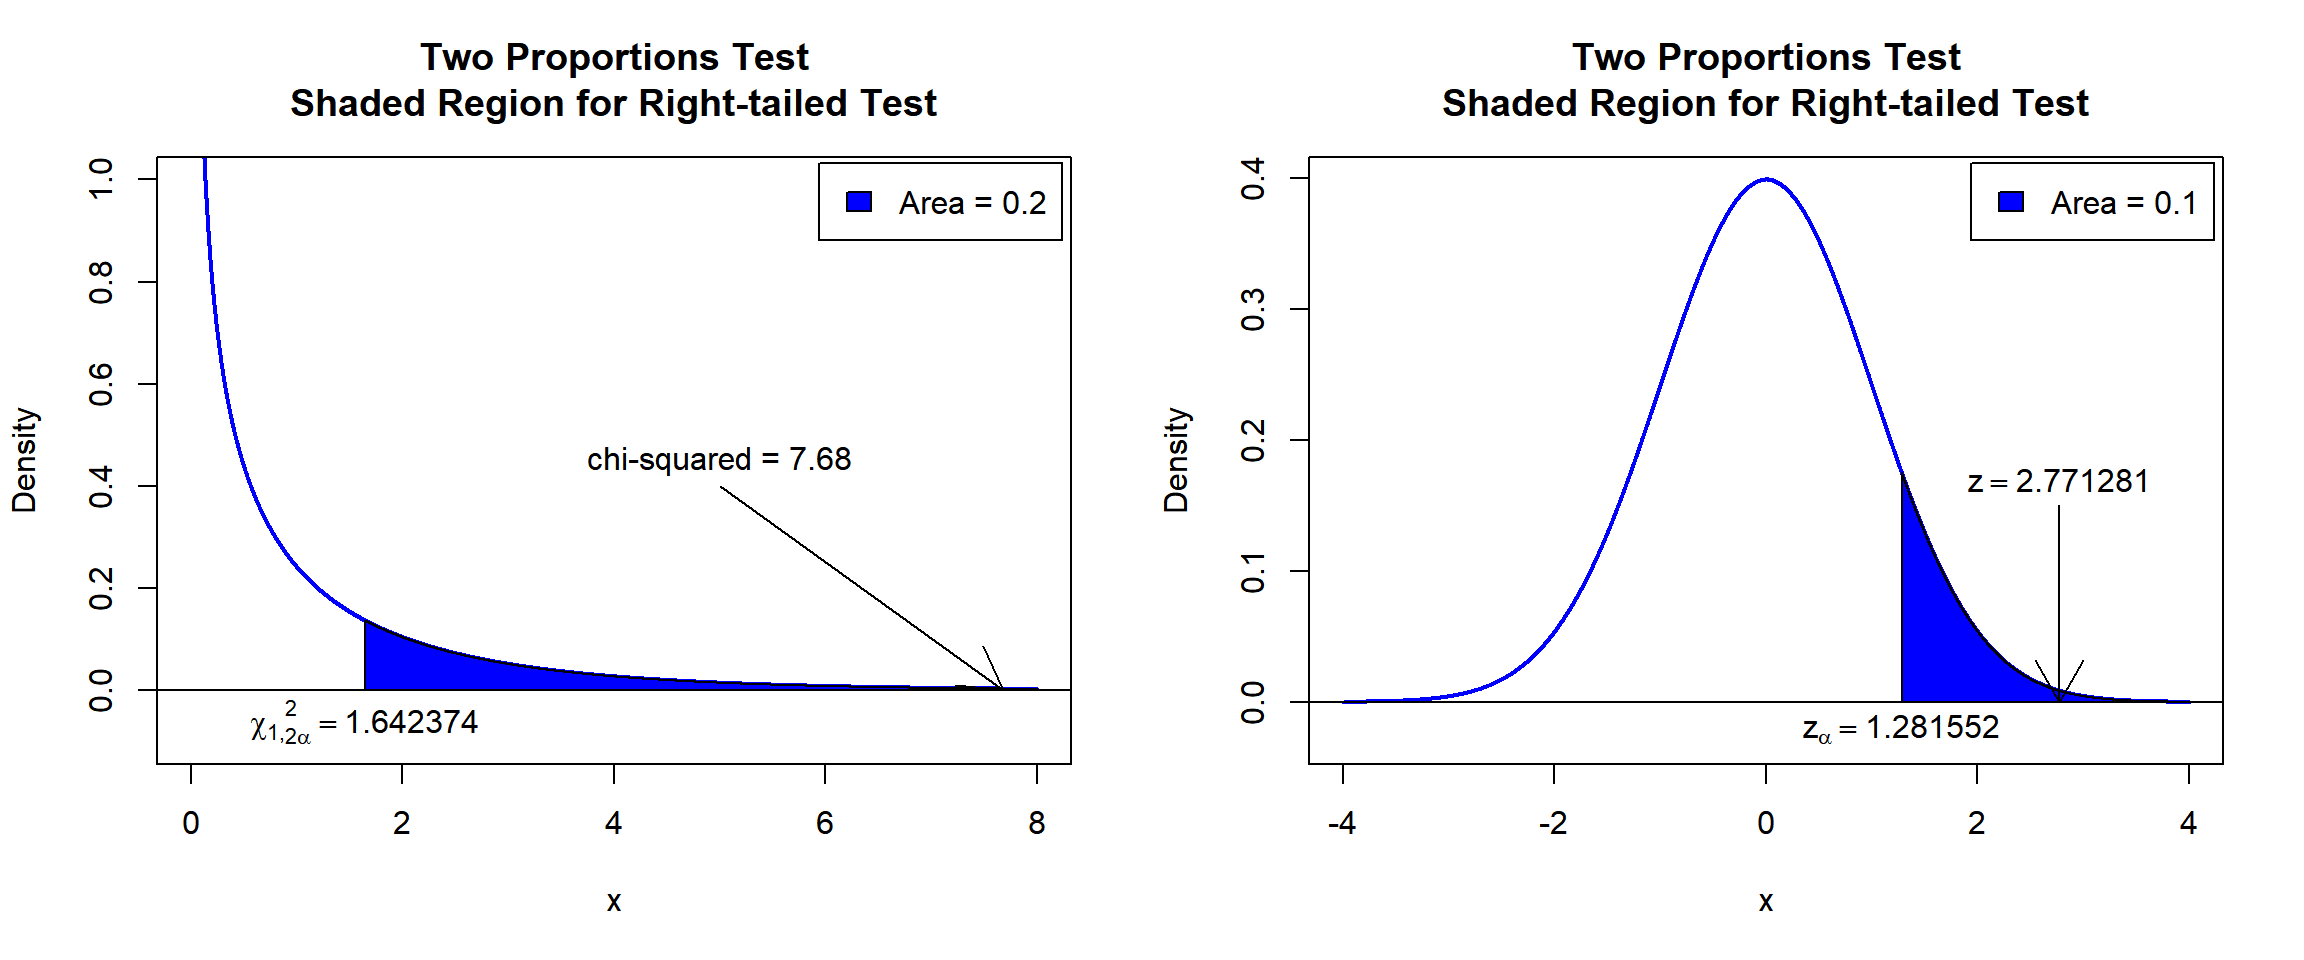 Two Proportions Test Shaded Region for Right-tailed Test in R